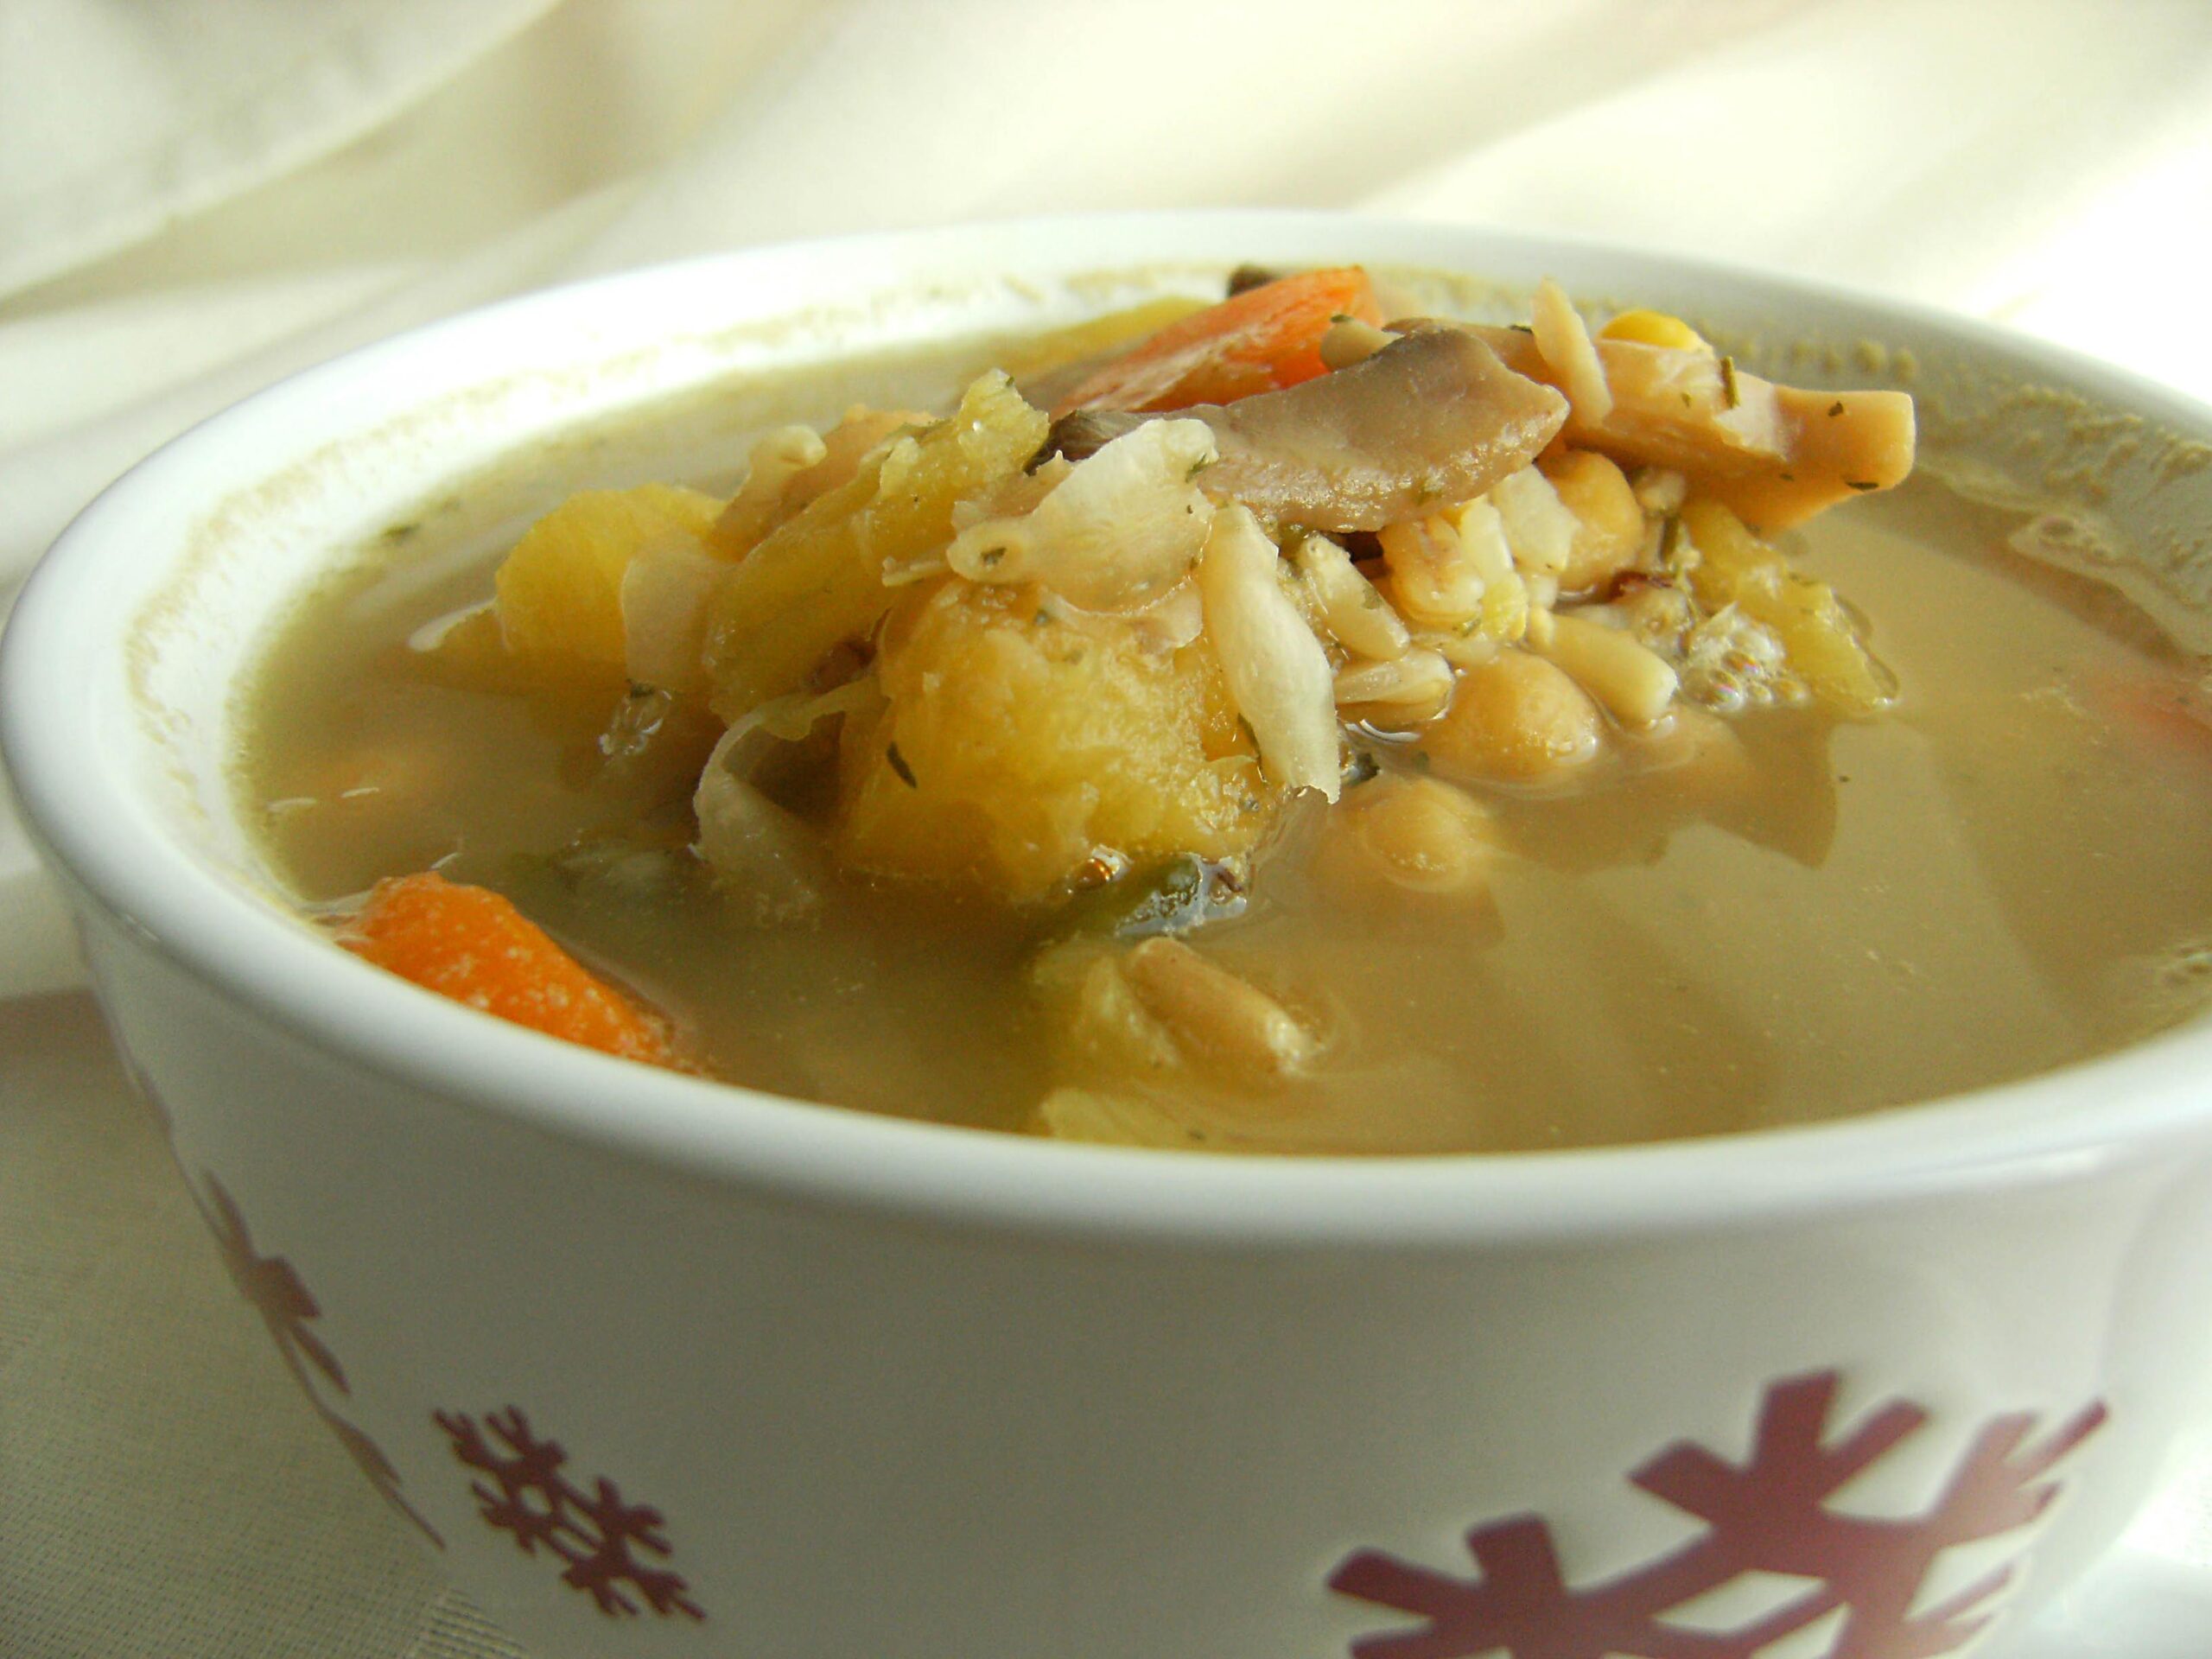  Dive into this bowl of alluring savory soup that's bound to knock your socks off!